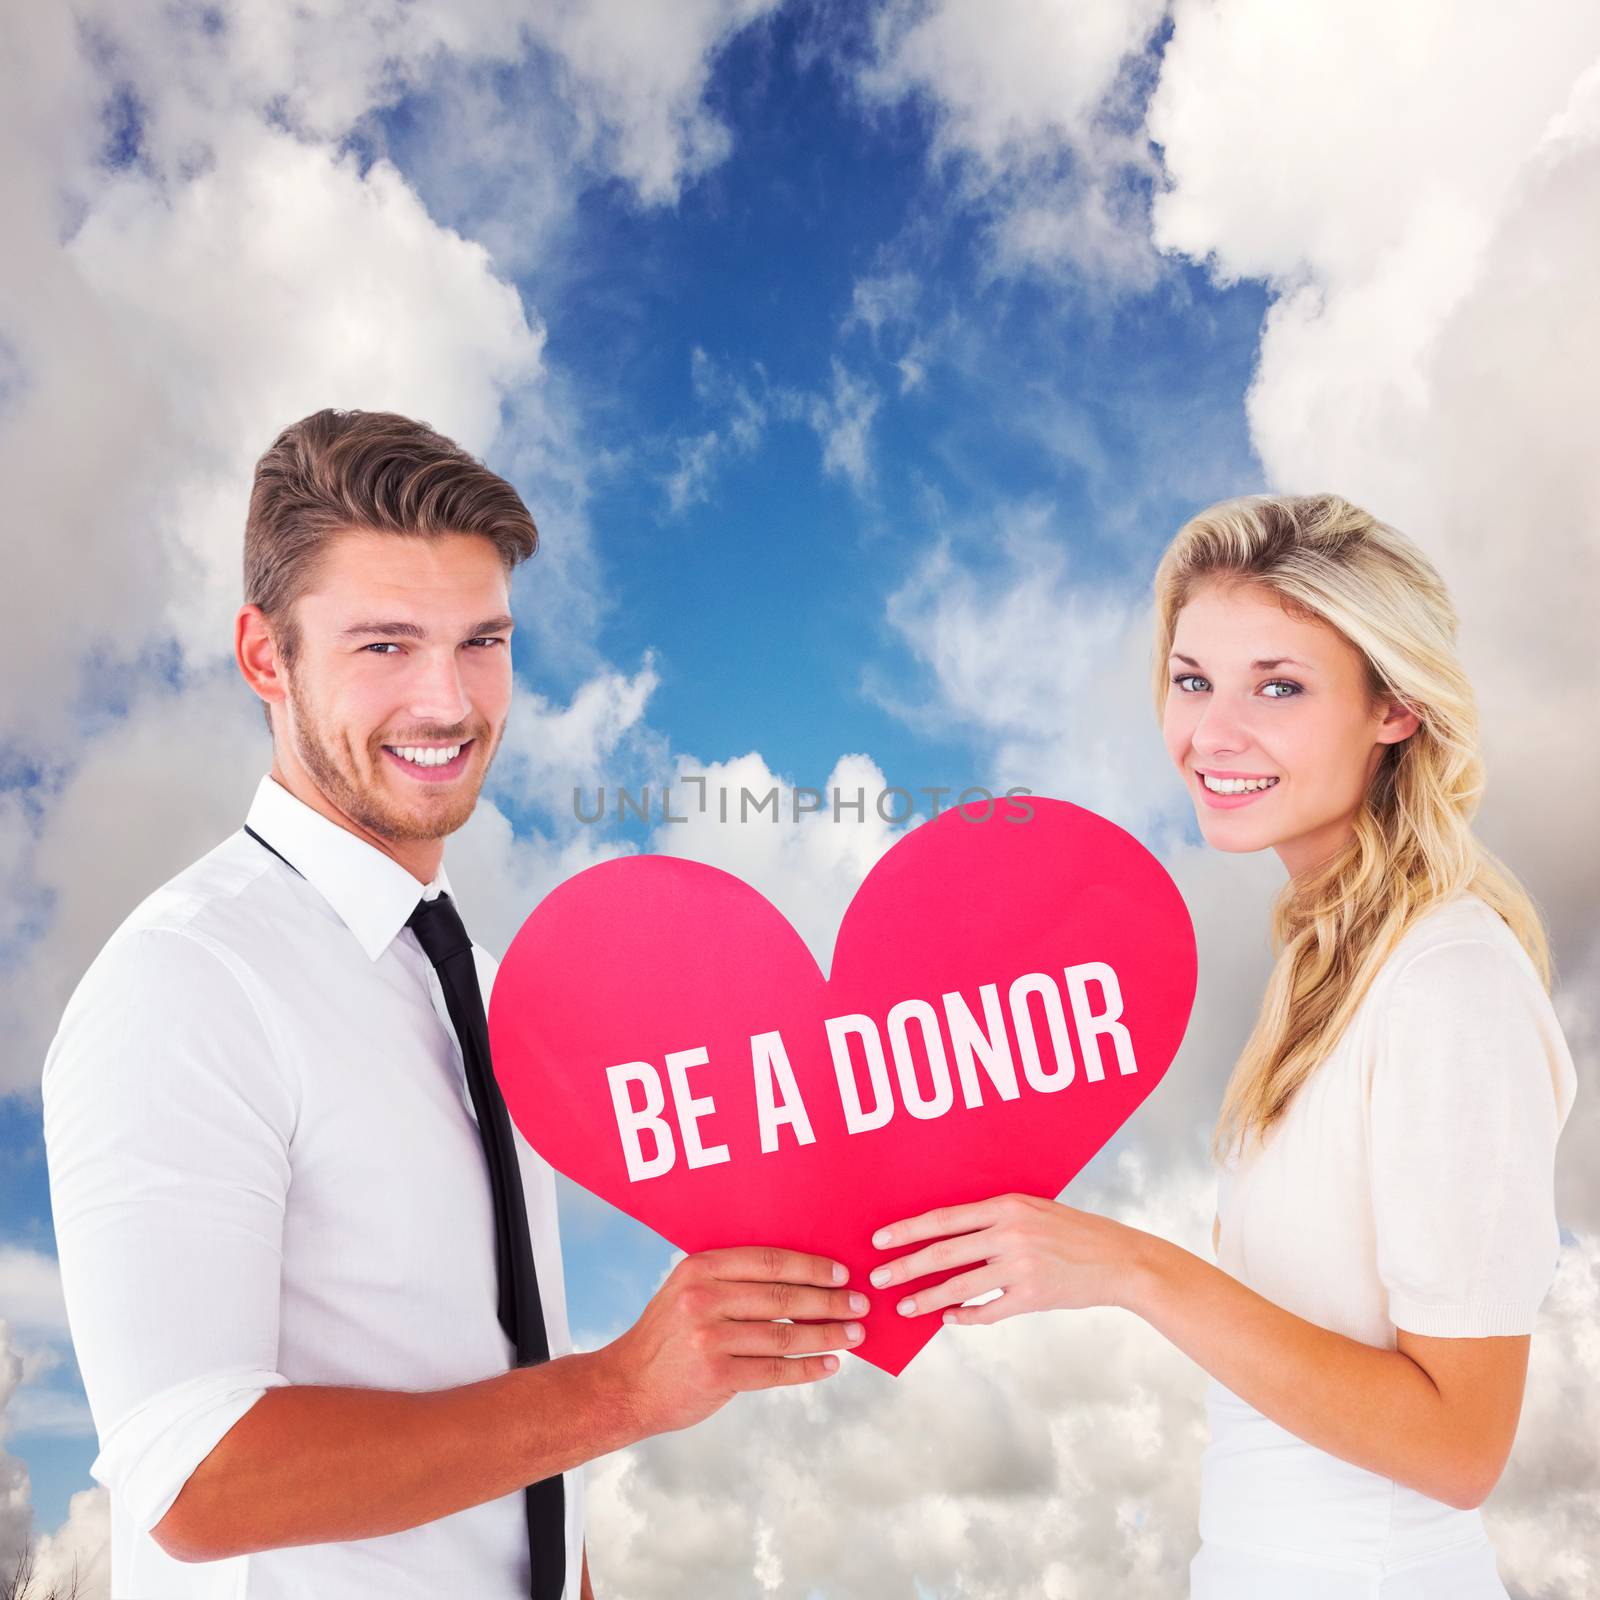 Attractive young couple holding red heart against blue sky with white clouds